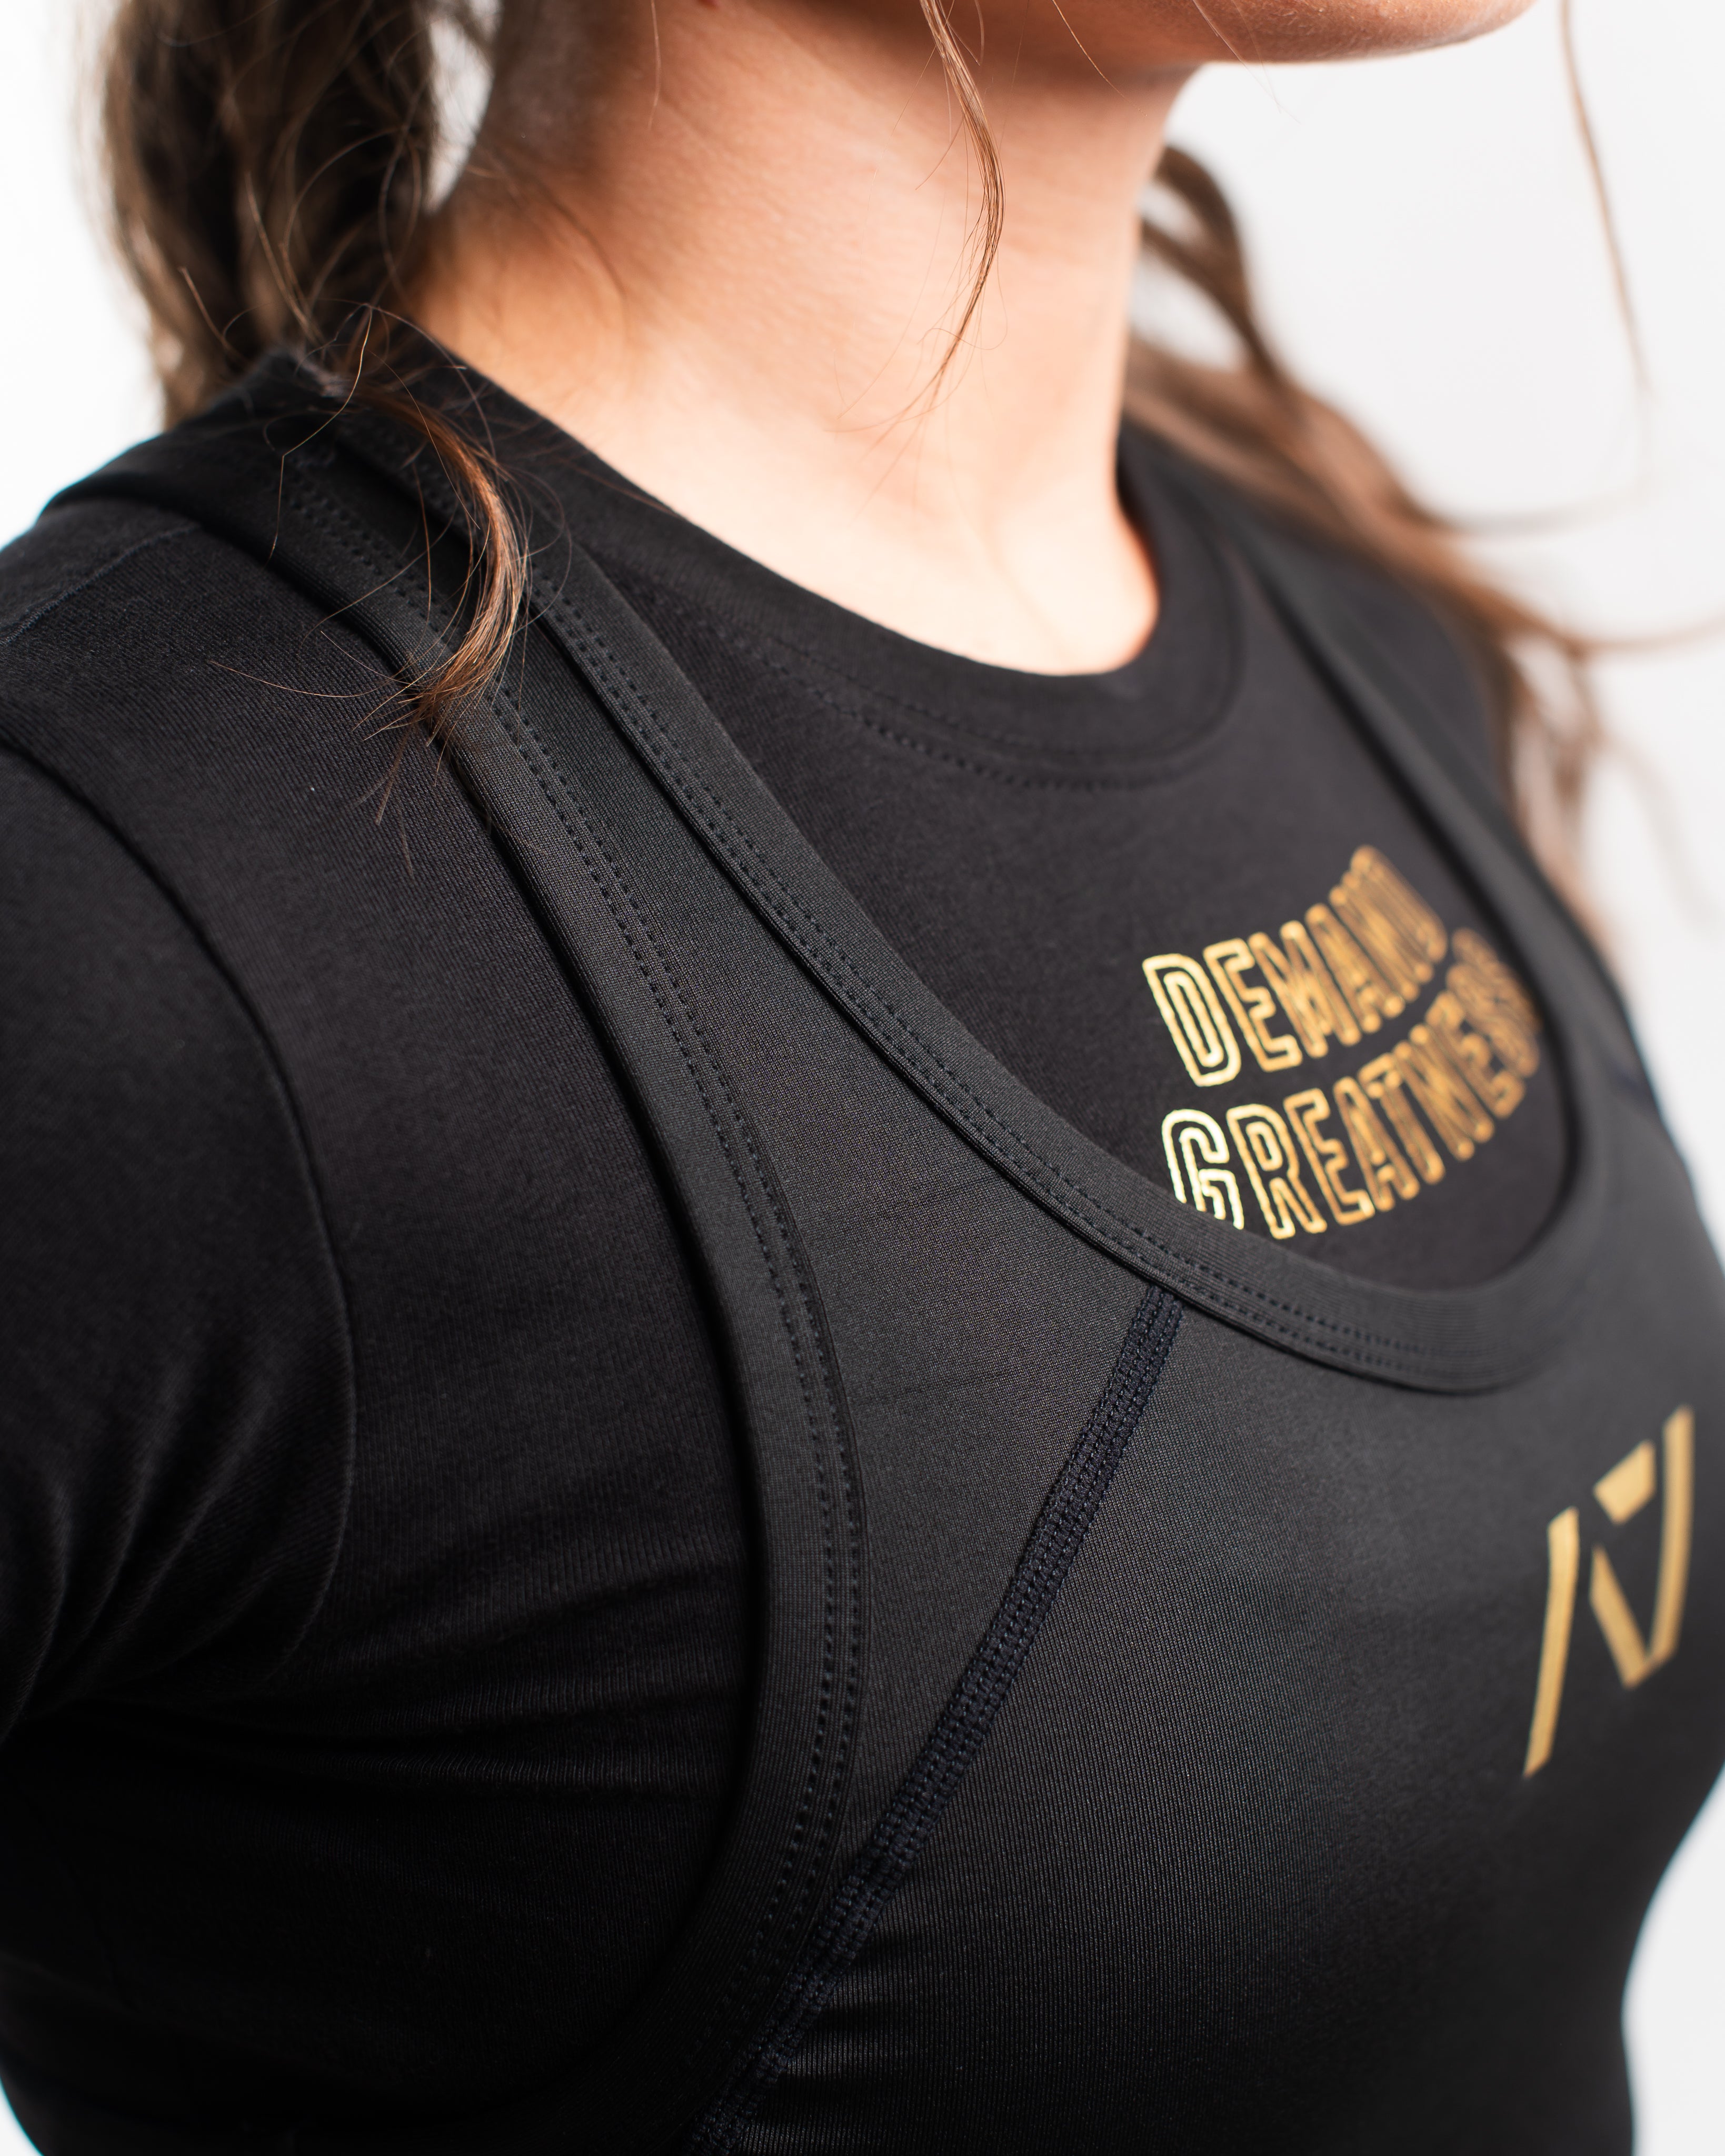 A7 IPF Approved Gold Standard Luno singlet features extra lat mobility, side panel stitching to guide the squat depth level and curved panel design for a slimming look. The Women's cut singlet features a tapered waist and additional quad room. The IPF Approved Kit includes Luno Powerlifting Singlet, A7 Meet Shirt, A7 Zebra Wrist Wraps, A7 Deadlift Socks, Hourglass Knee Sleeves (Stiff Knee Sleeves and Rigor Mortis Knee Sleeves). All A7 Powerlifting Equipment shipping to UK, Norway, Switzerland and Iceland.